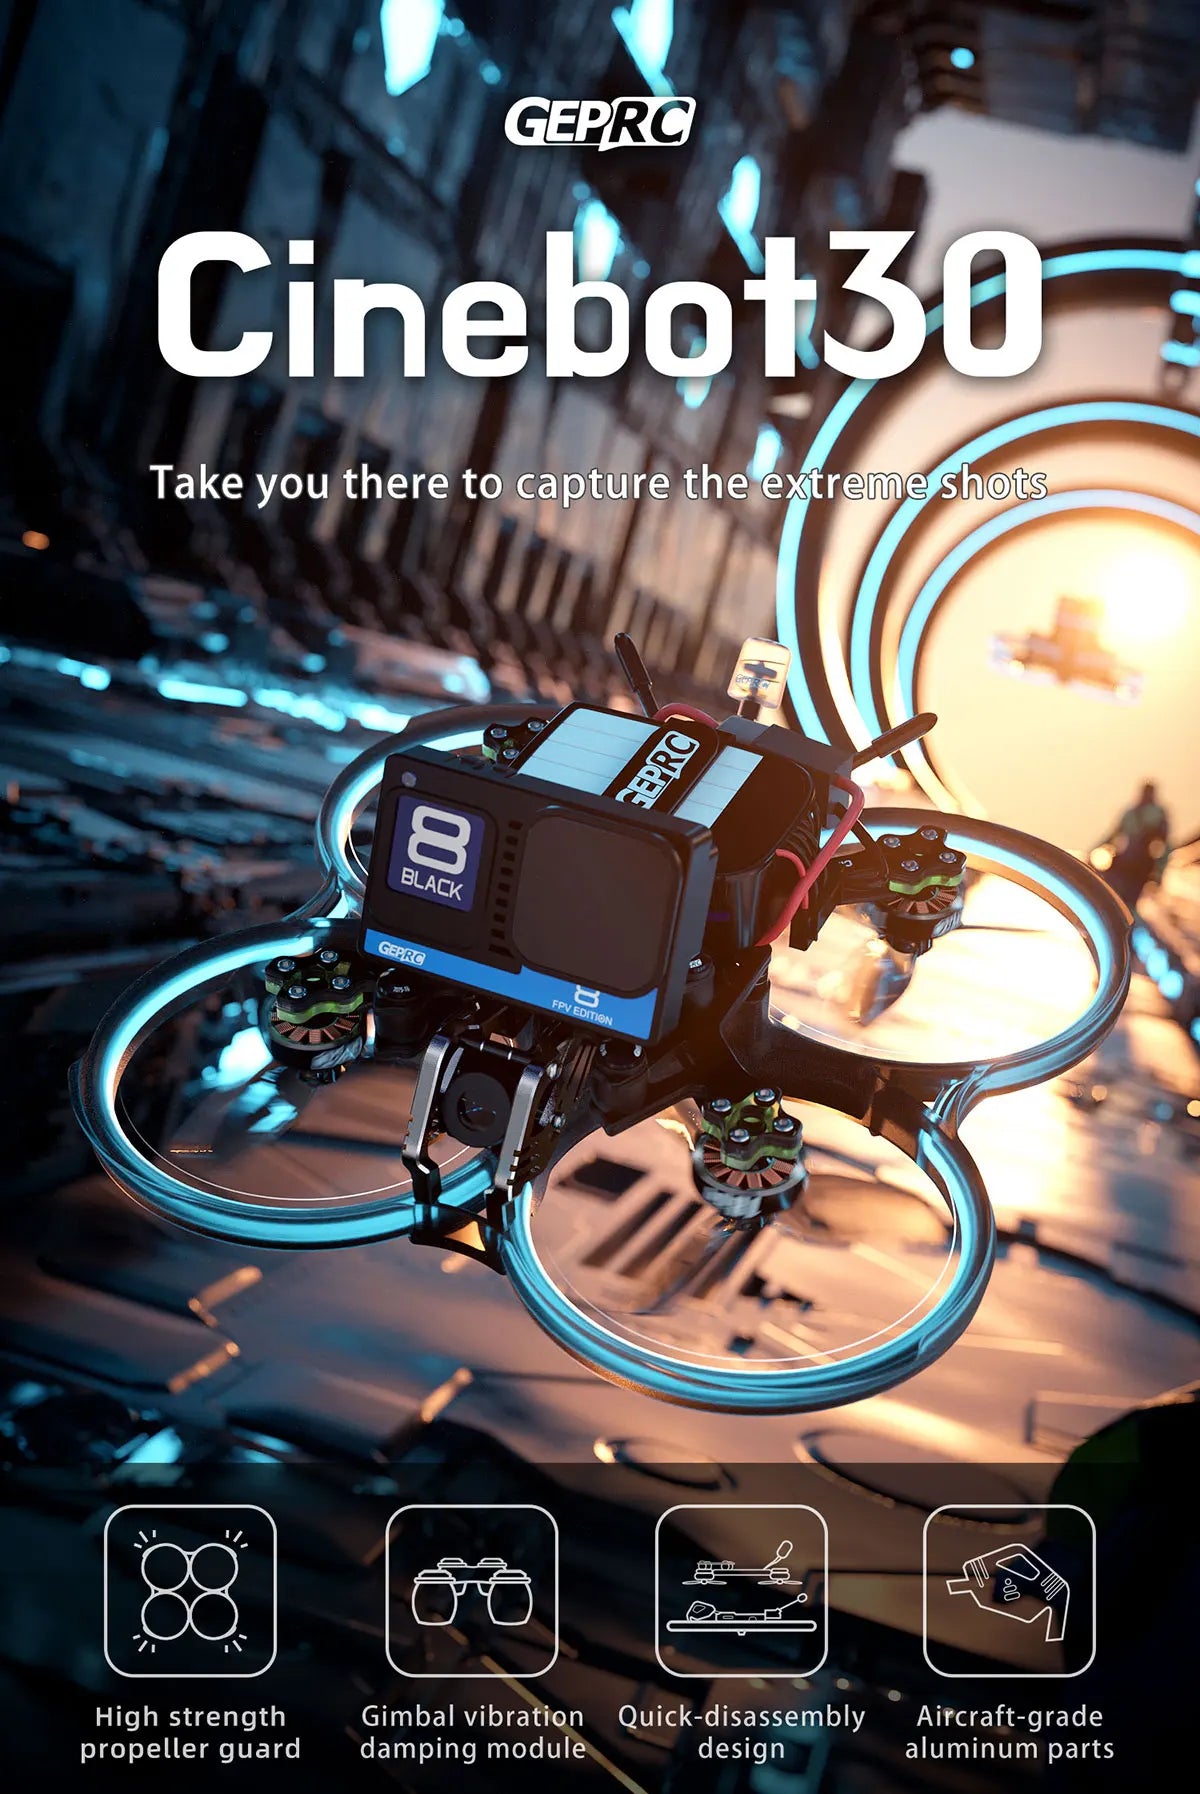 GEPRC Cinebot30 FPV Drone, GEPRC Cinebot3o Take you there to capture the exitreme shots 8 